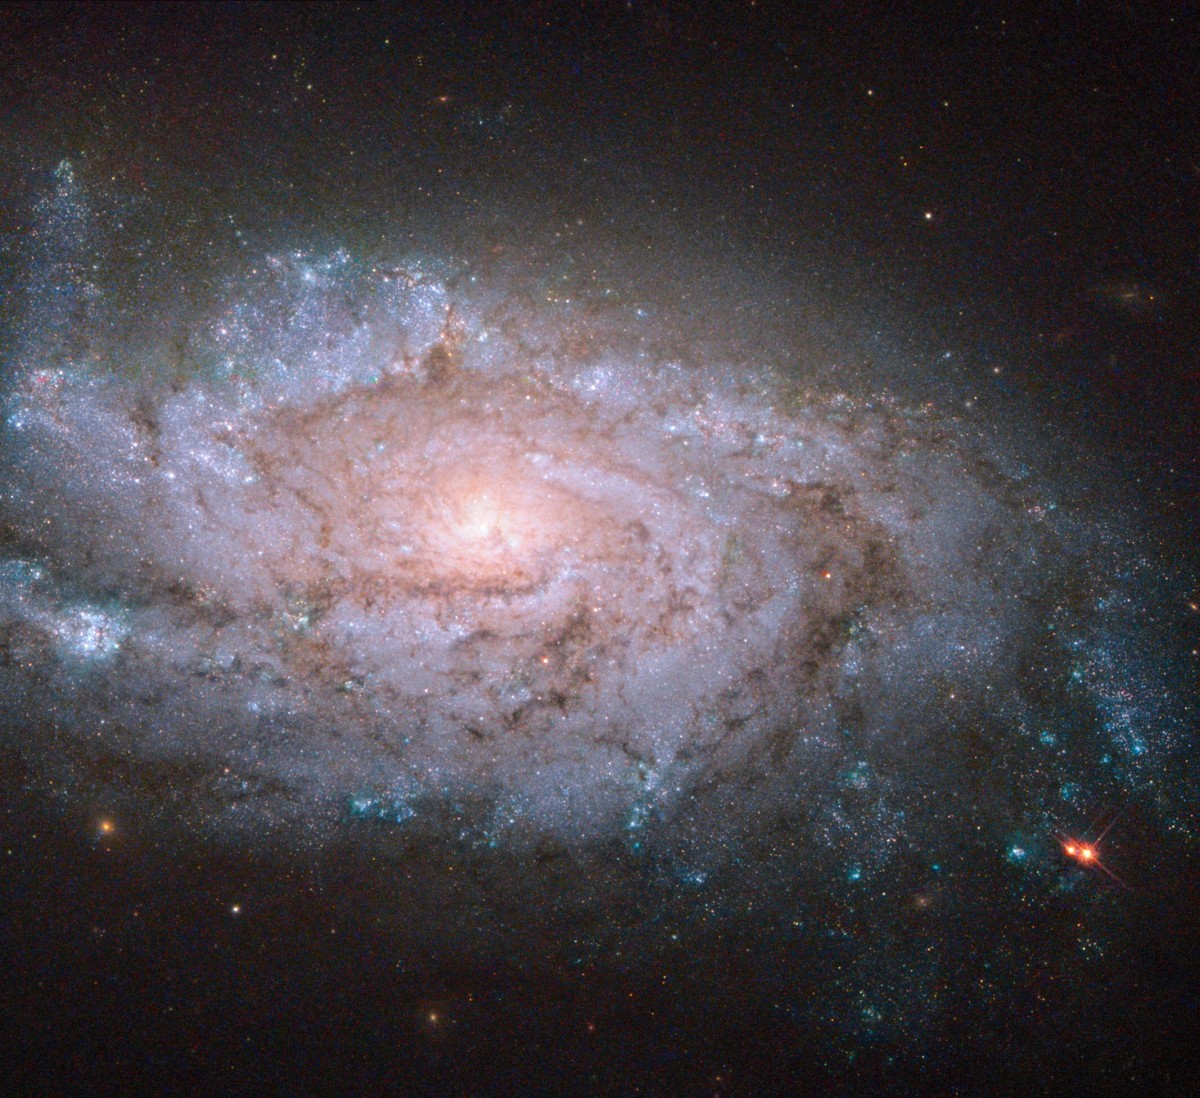 Hubble Space Telescope image of NGC 1084, a spiral galaxy